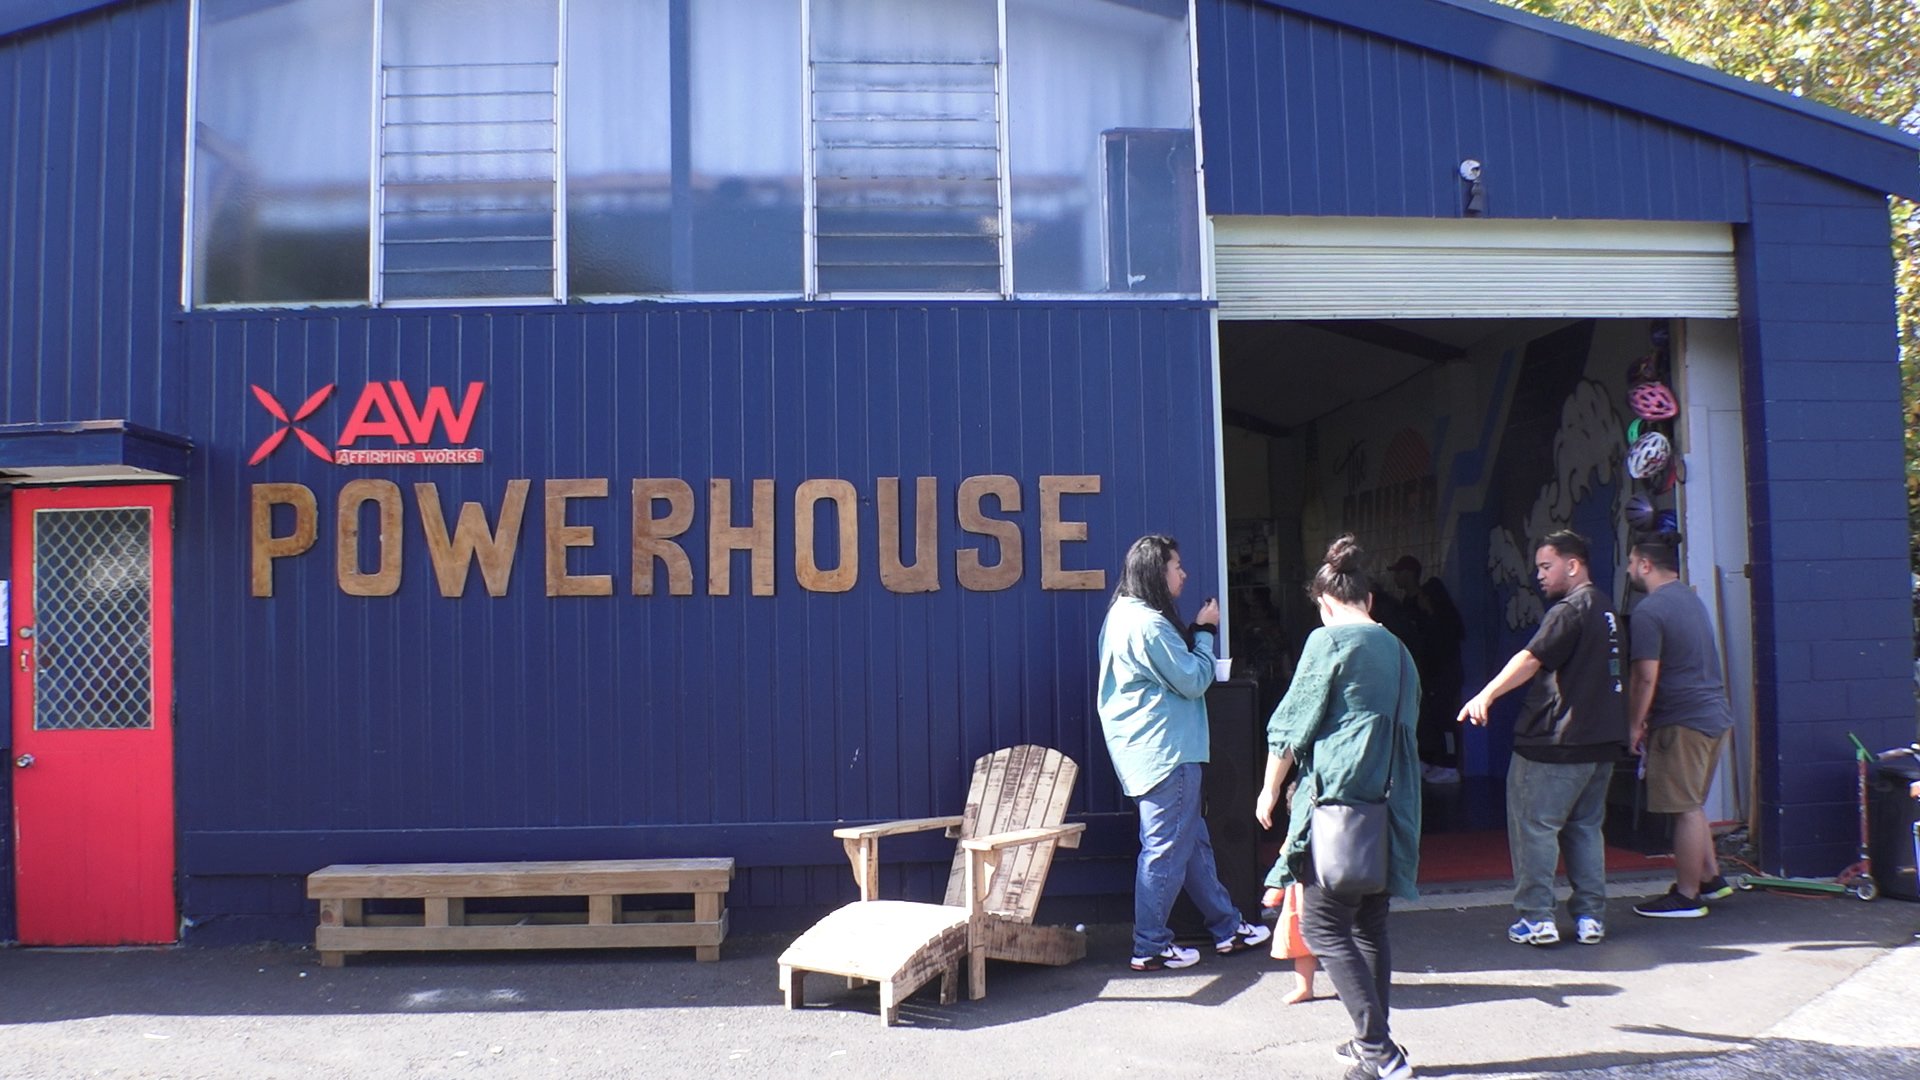 Powerhouse: The new hub empowering Ōtara youth and families